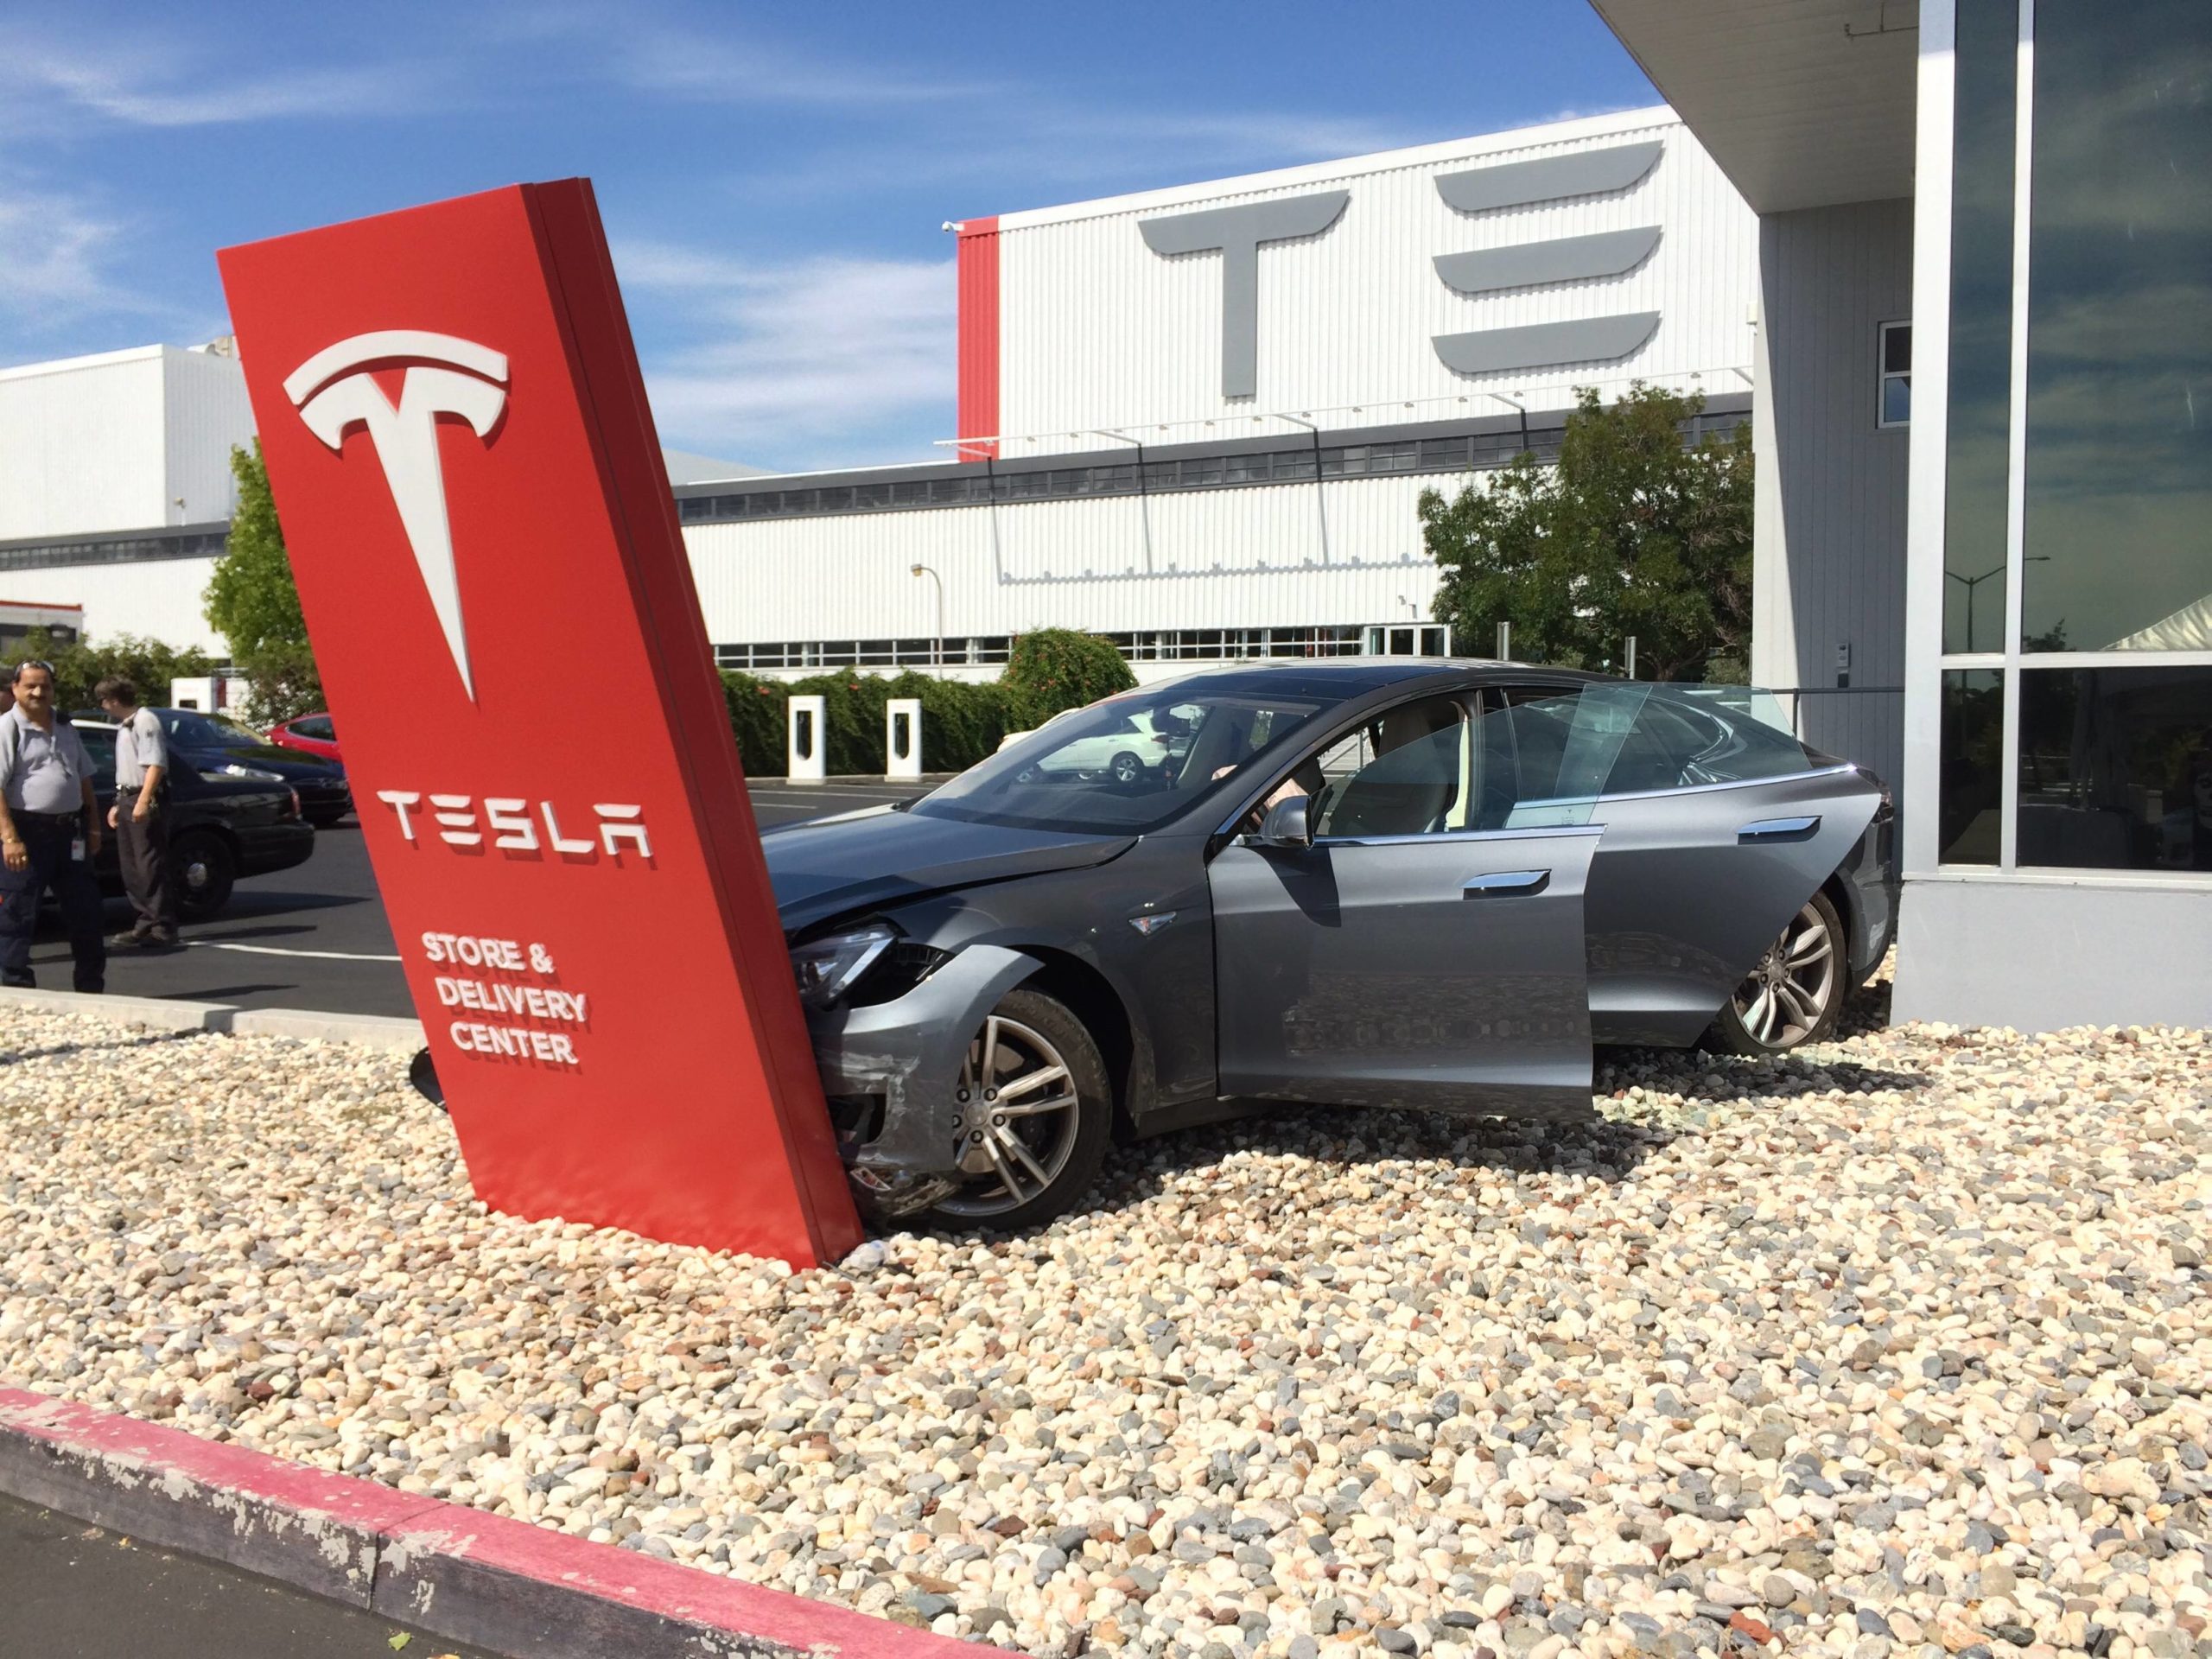 self driving car related fatality: can tesla be sued?